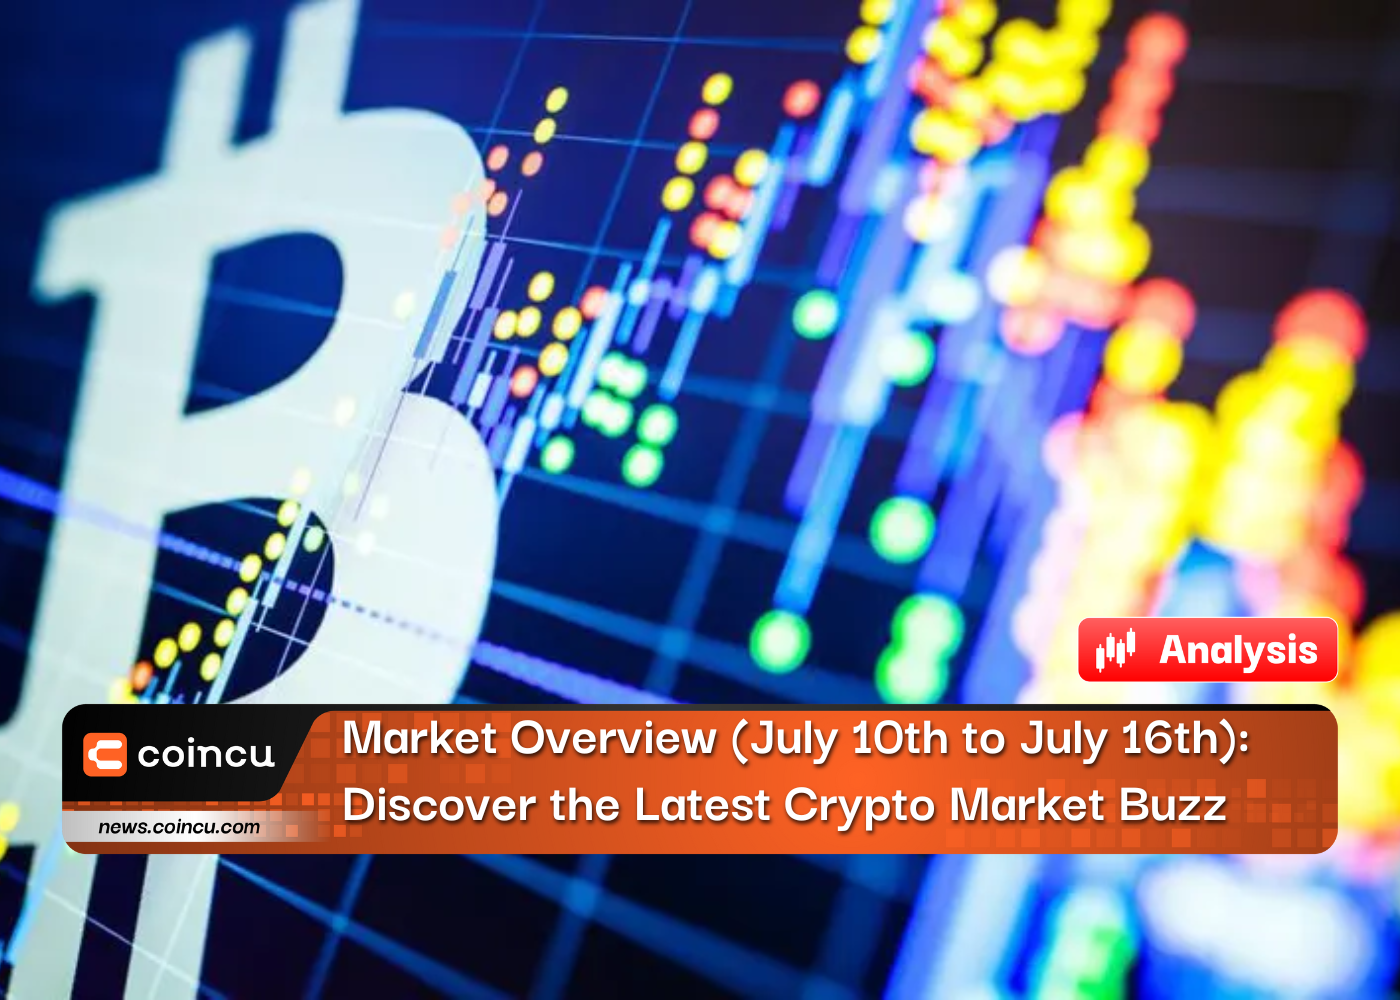 Market Overview (July 10th to July 16th): Discover the Latest Crypto Market Buzz